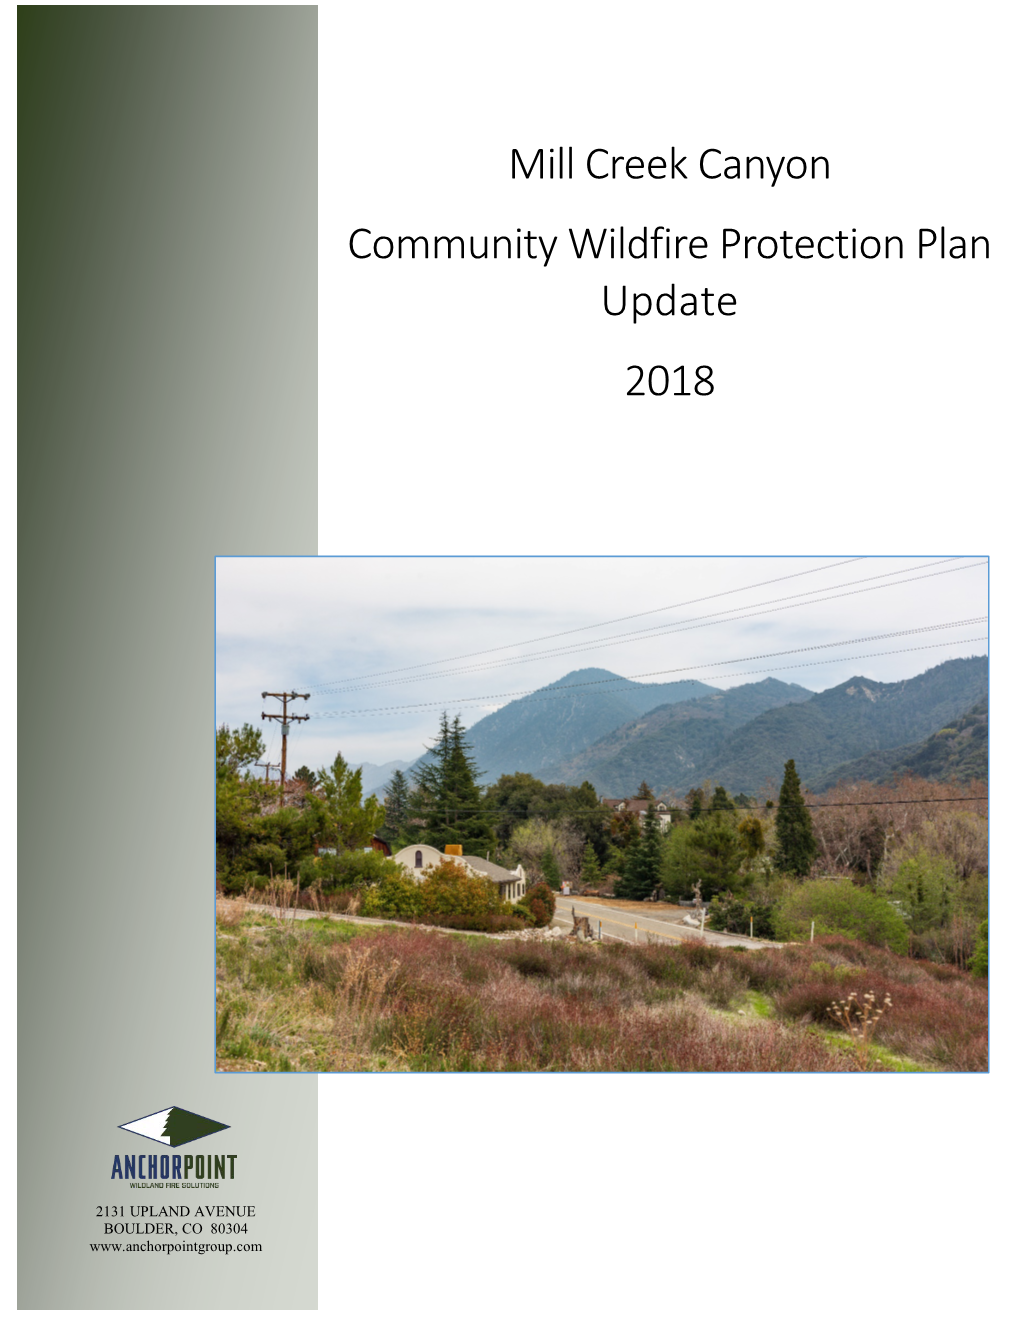 Mill Creek Canyon Community Wildfire Protection Plan